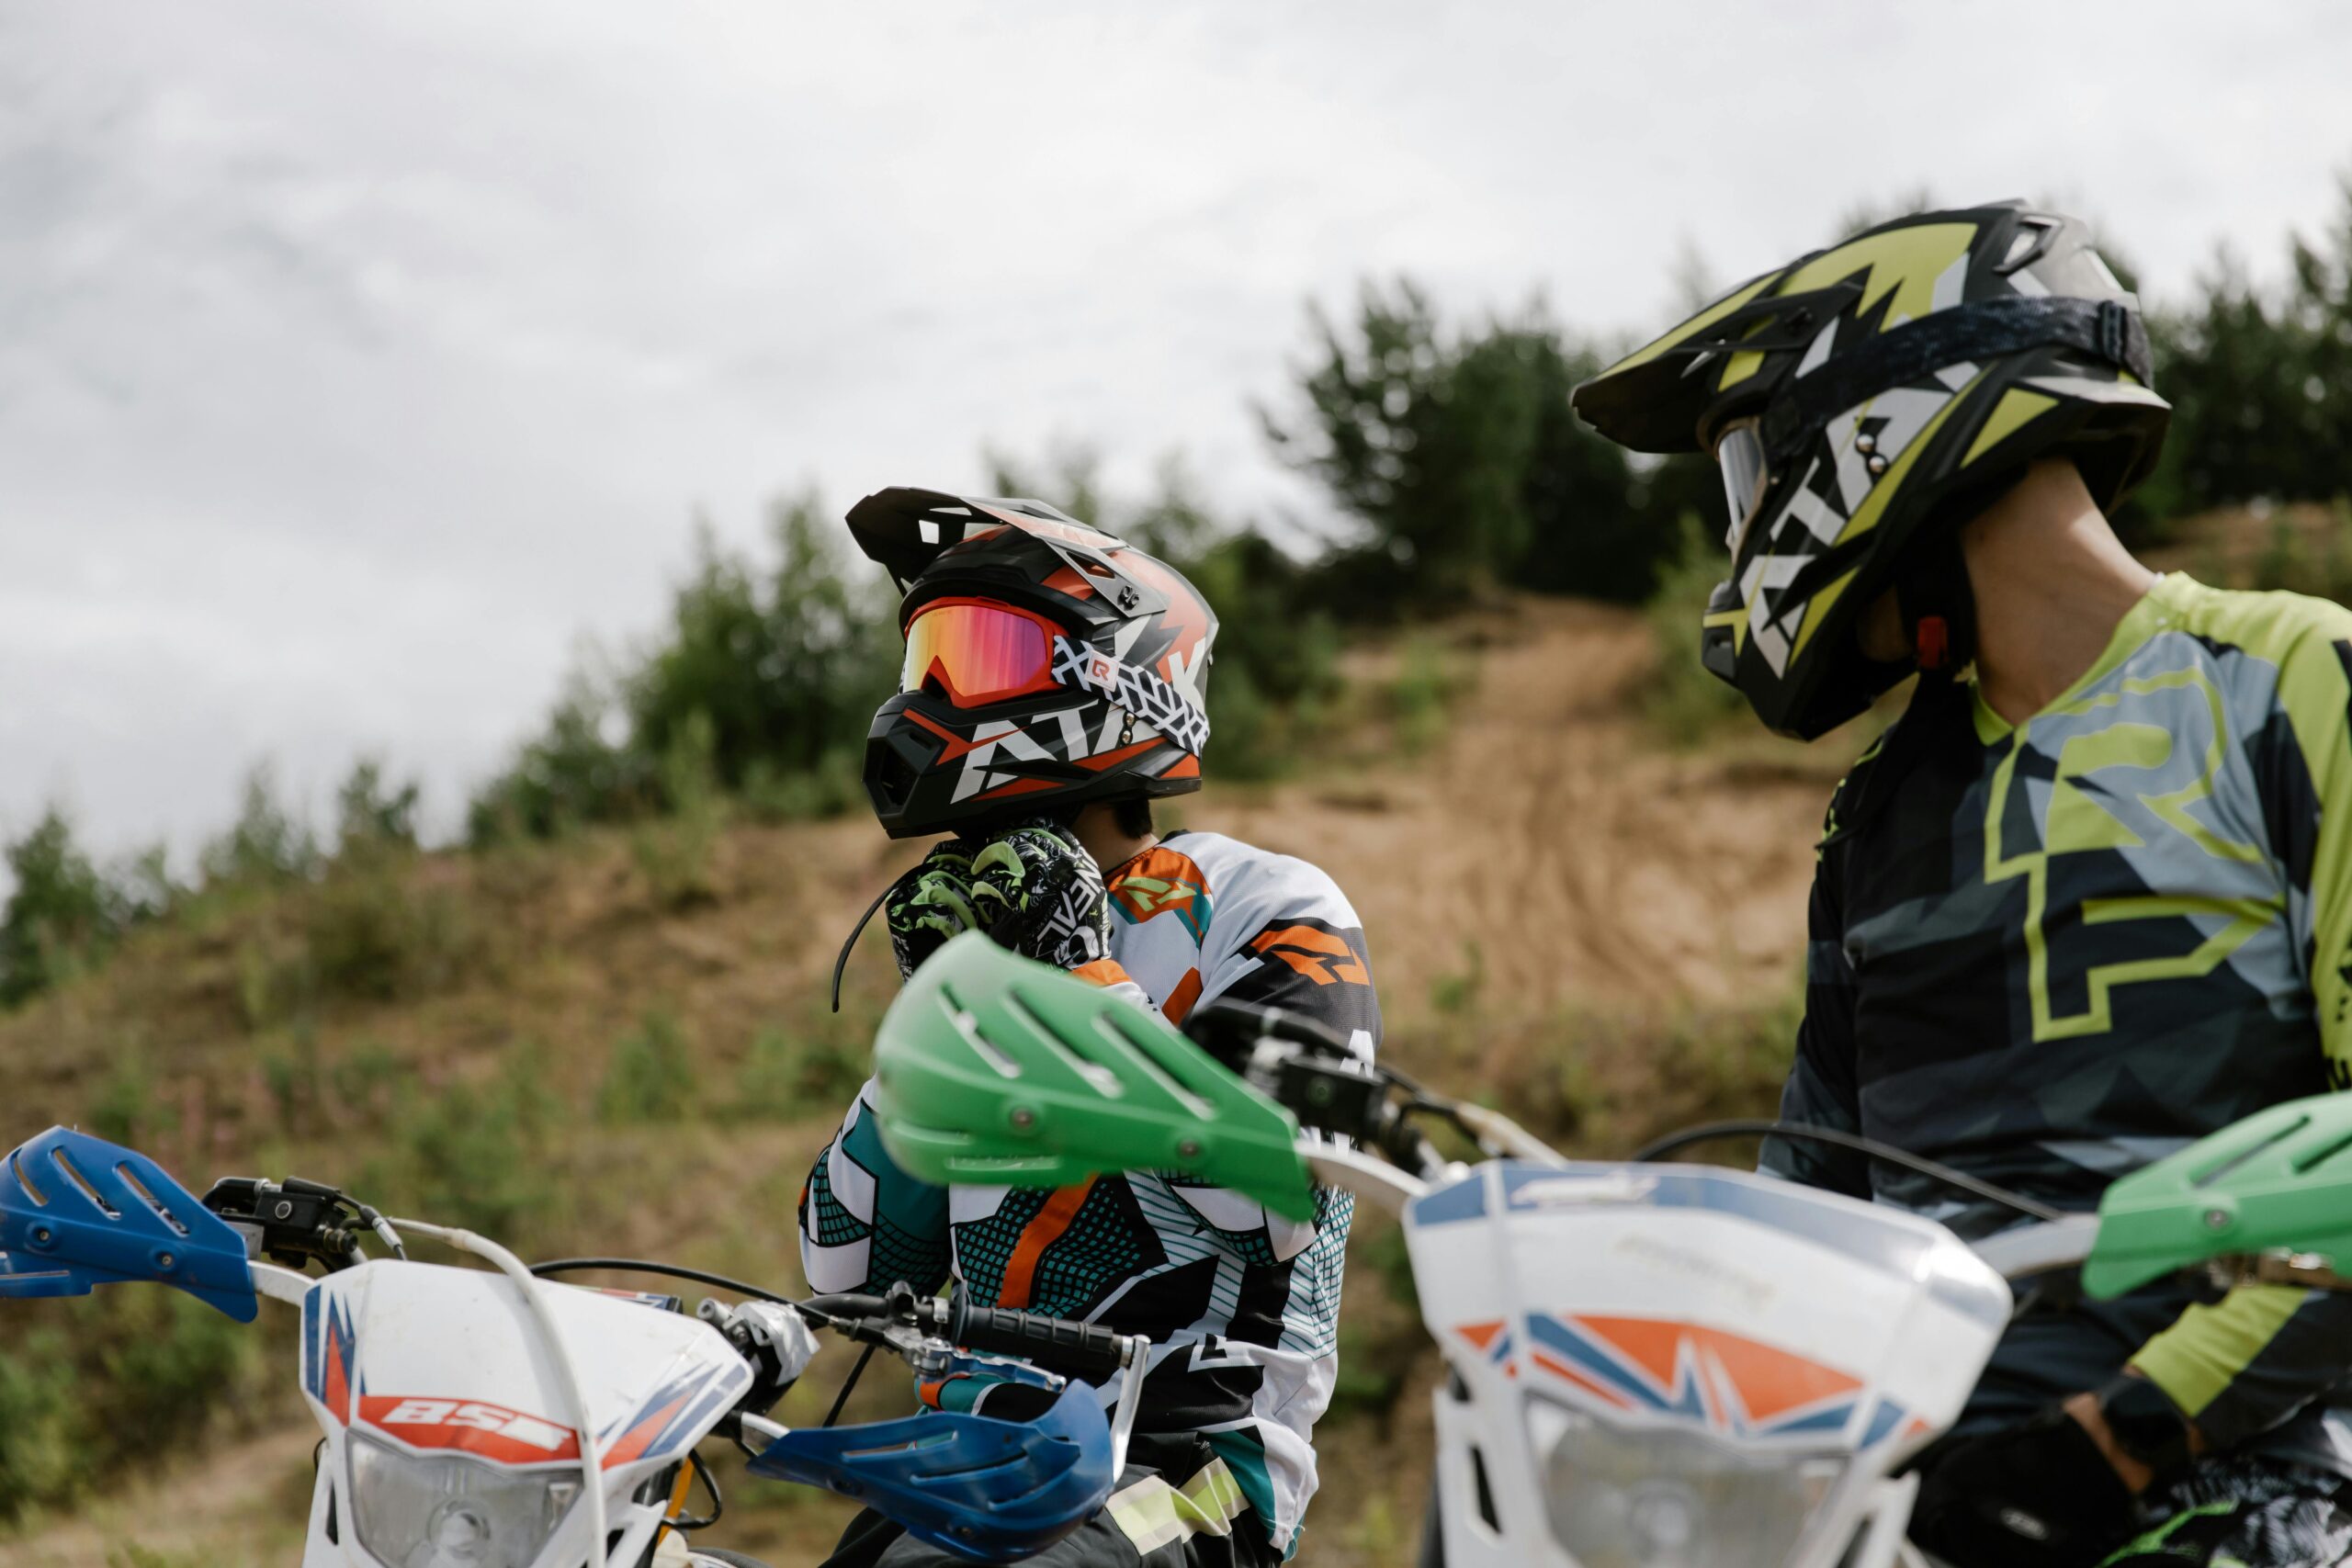 why are dirt bike helmets shaped differently